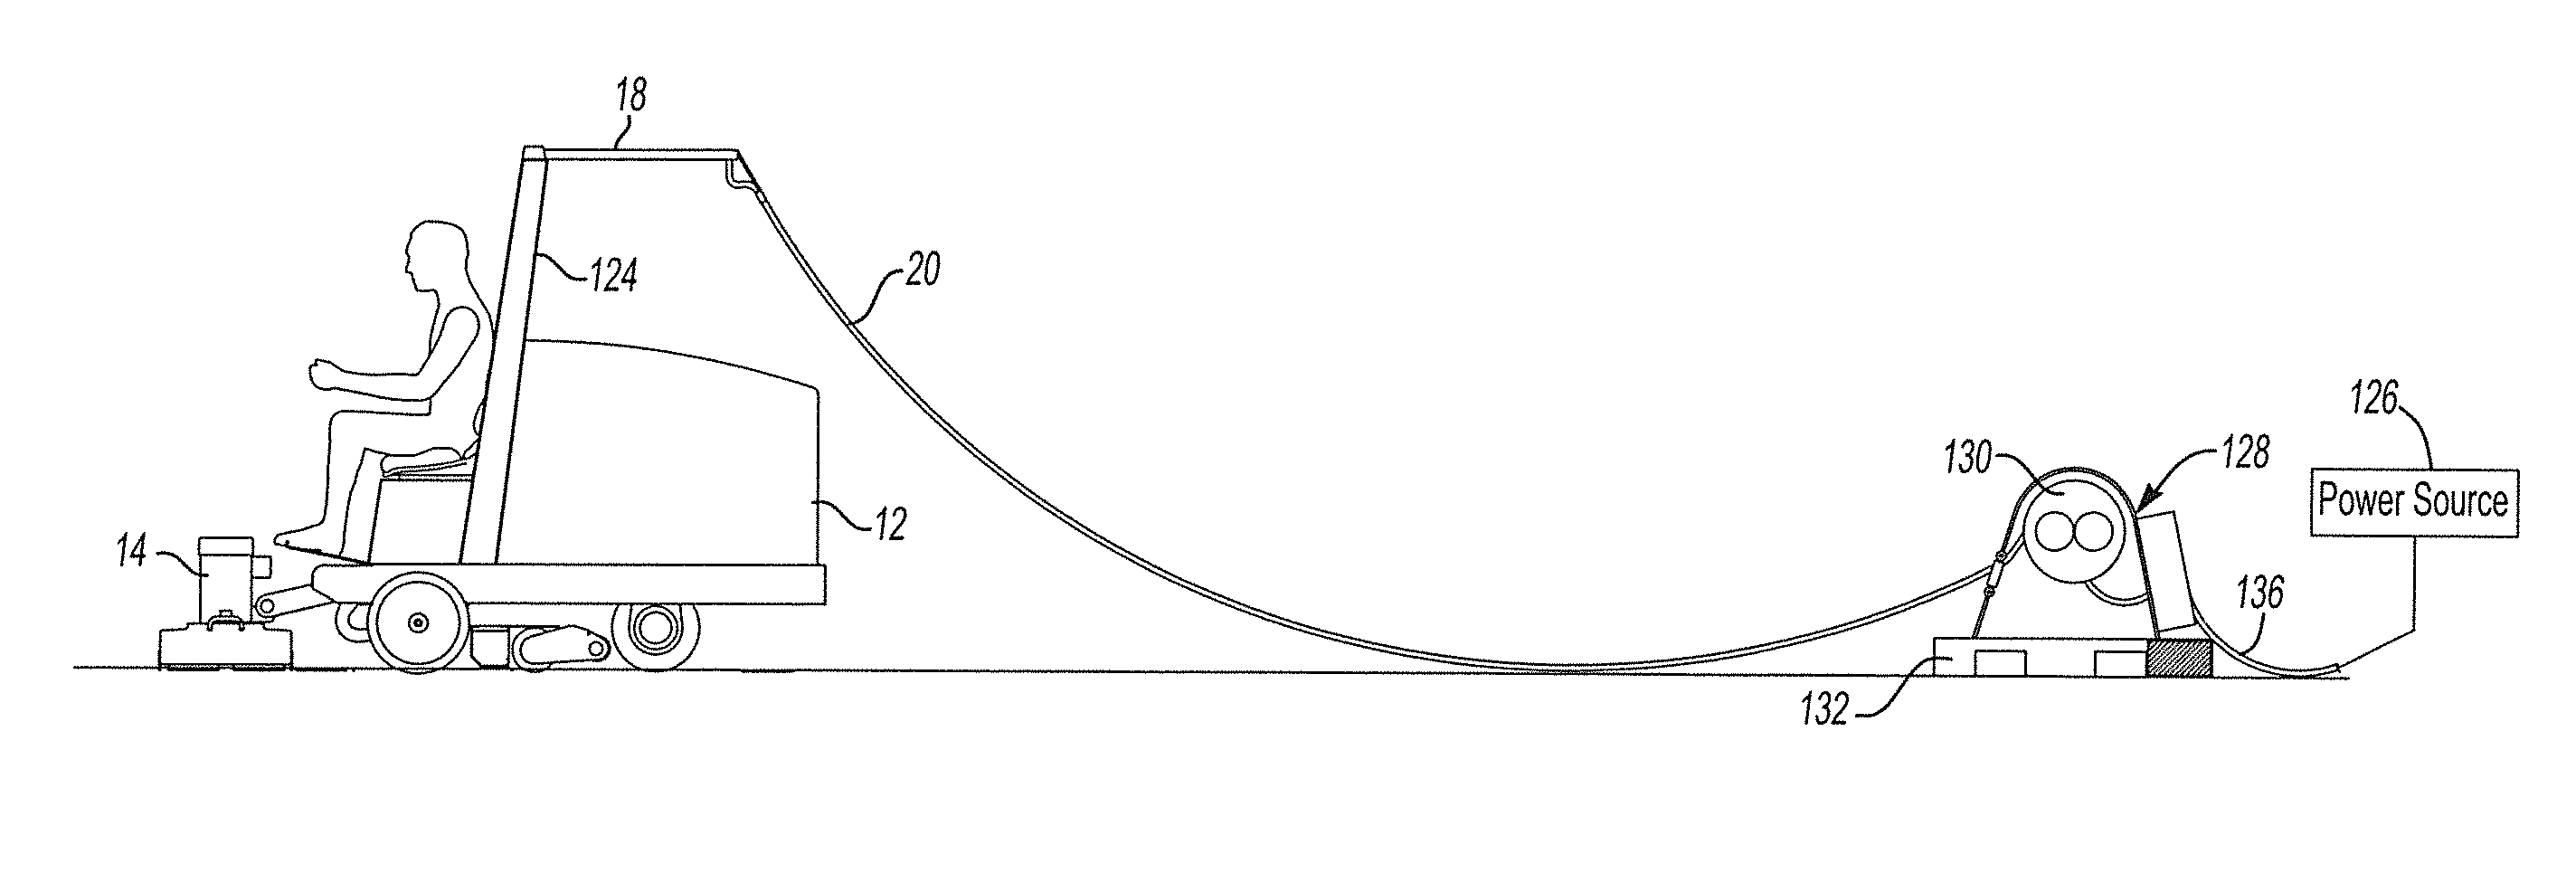 Riding apparatus for treating floor surfaces with a power cord handling swing arm